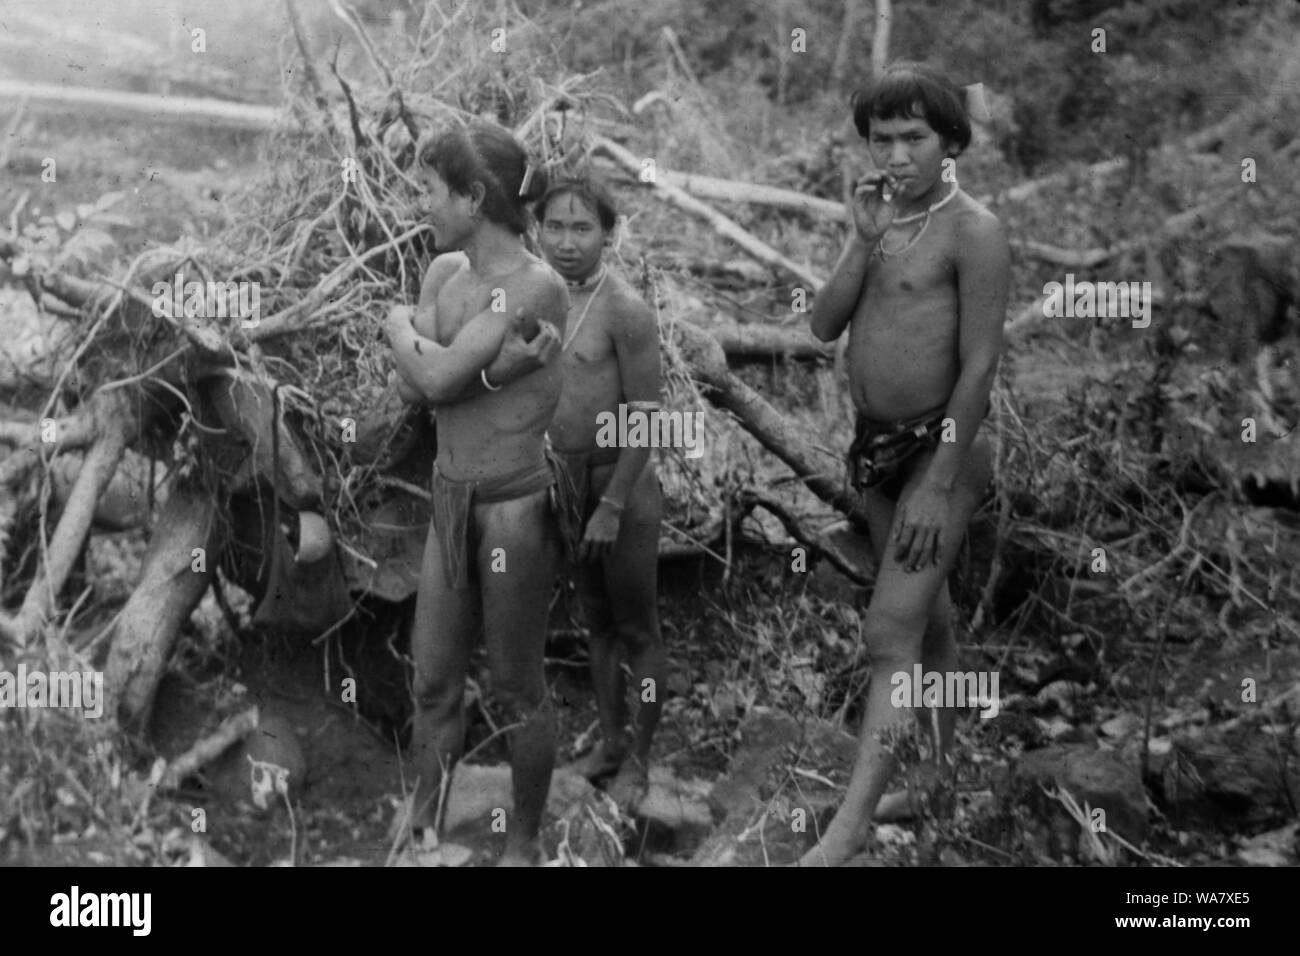 AJAXNETPHOTO. 1953-1957 (APPROX). INDO CHINA. VIETNAM. (IN-COUNTRY LOCATION UNKNOWN.) -  GROUP OF ETHNIC TRIBESMEN, POSSIBLY MONTAGNARDS, IN A COUNTRY LANDSCAPE. PHOTO:JEAN CORRE/AJAXREF:RX7 191508 255 Stock Photo